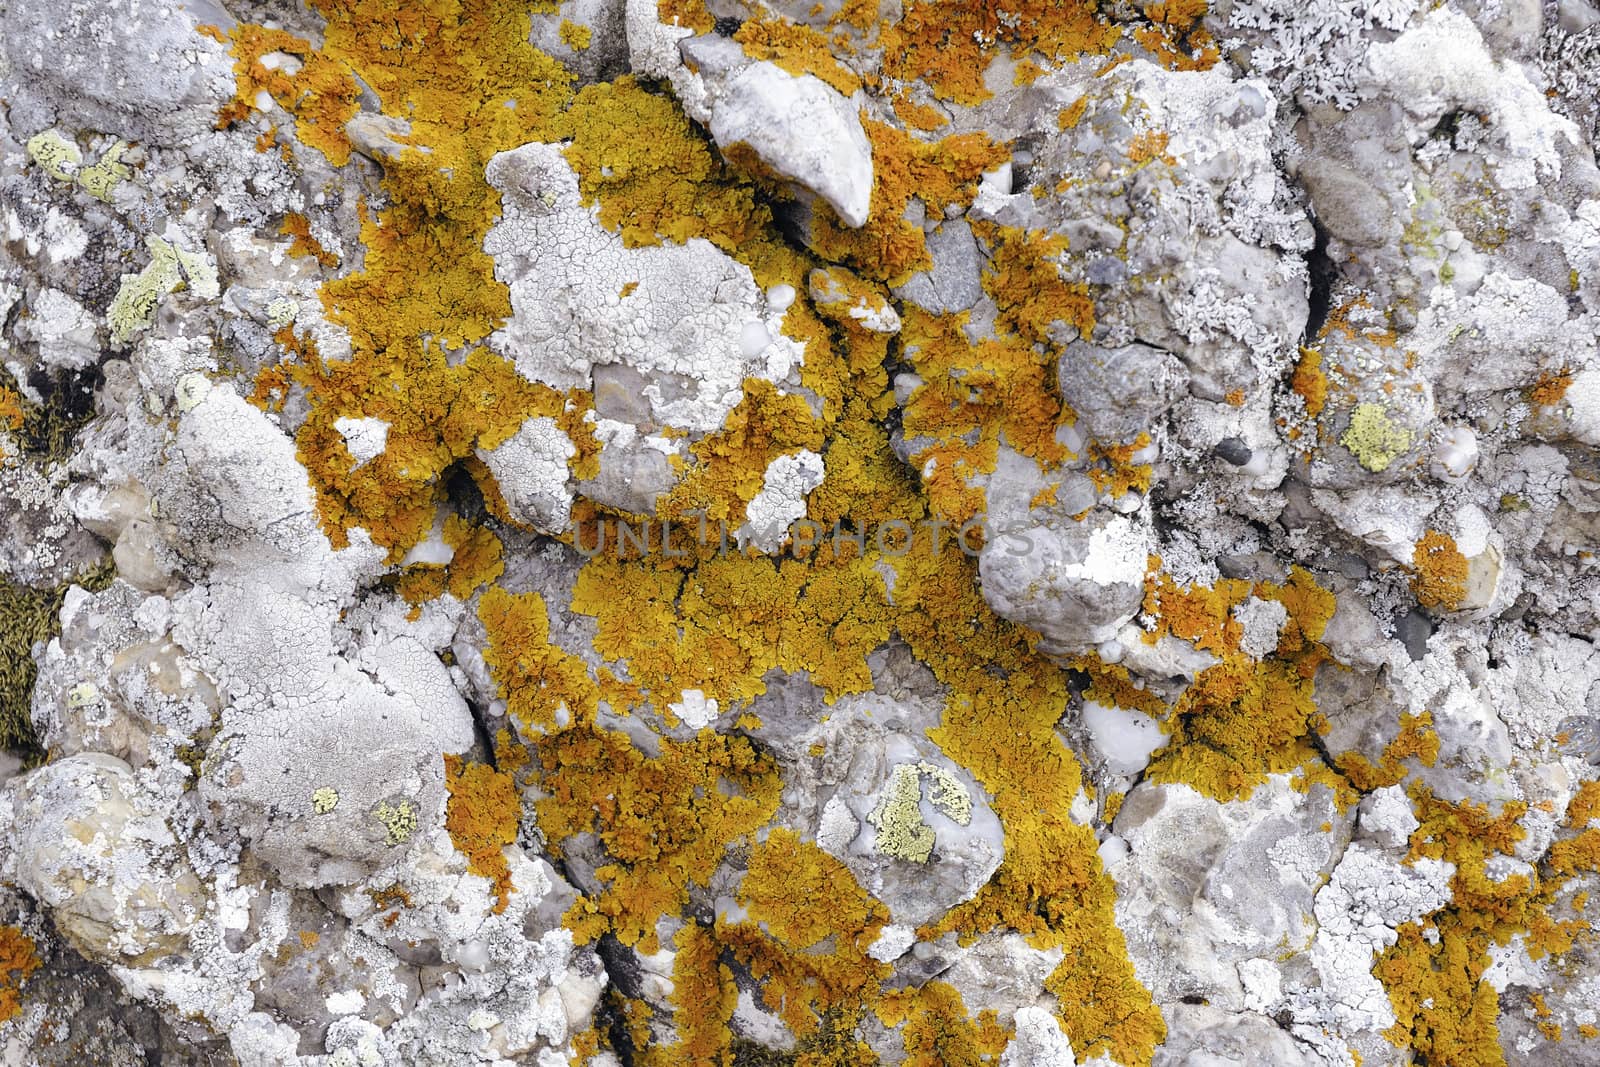 red lichen on the gray stone background; focus on central part